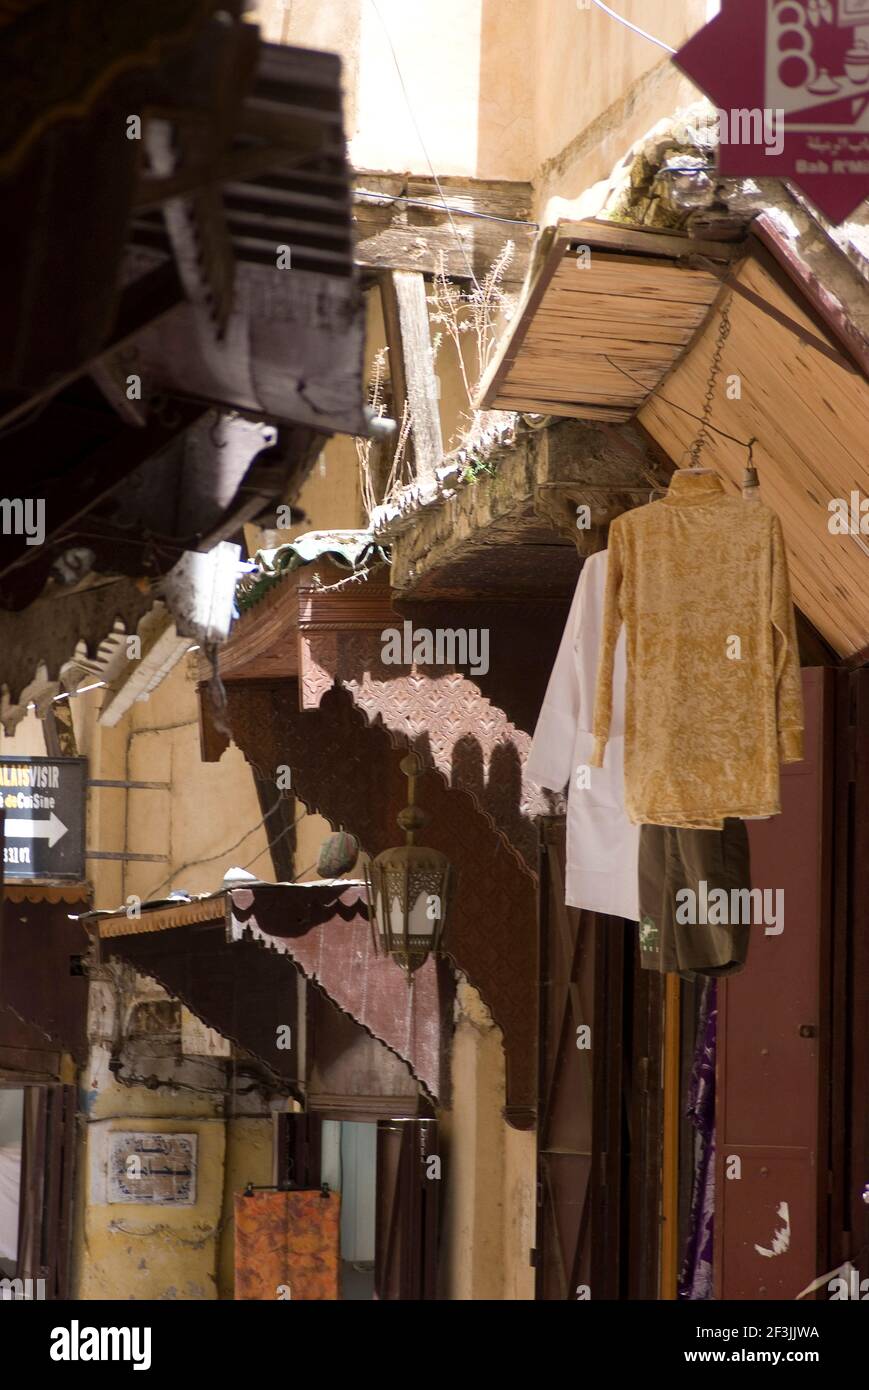 Awnings, roofs and clothes hanging in the medina, Fes, Morocco Stock Photo